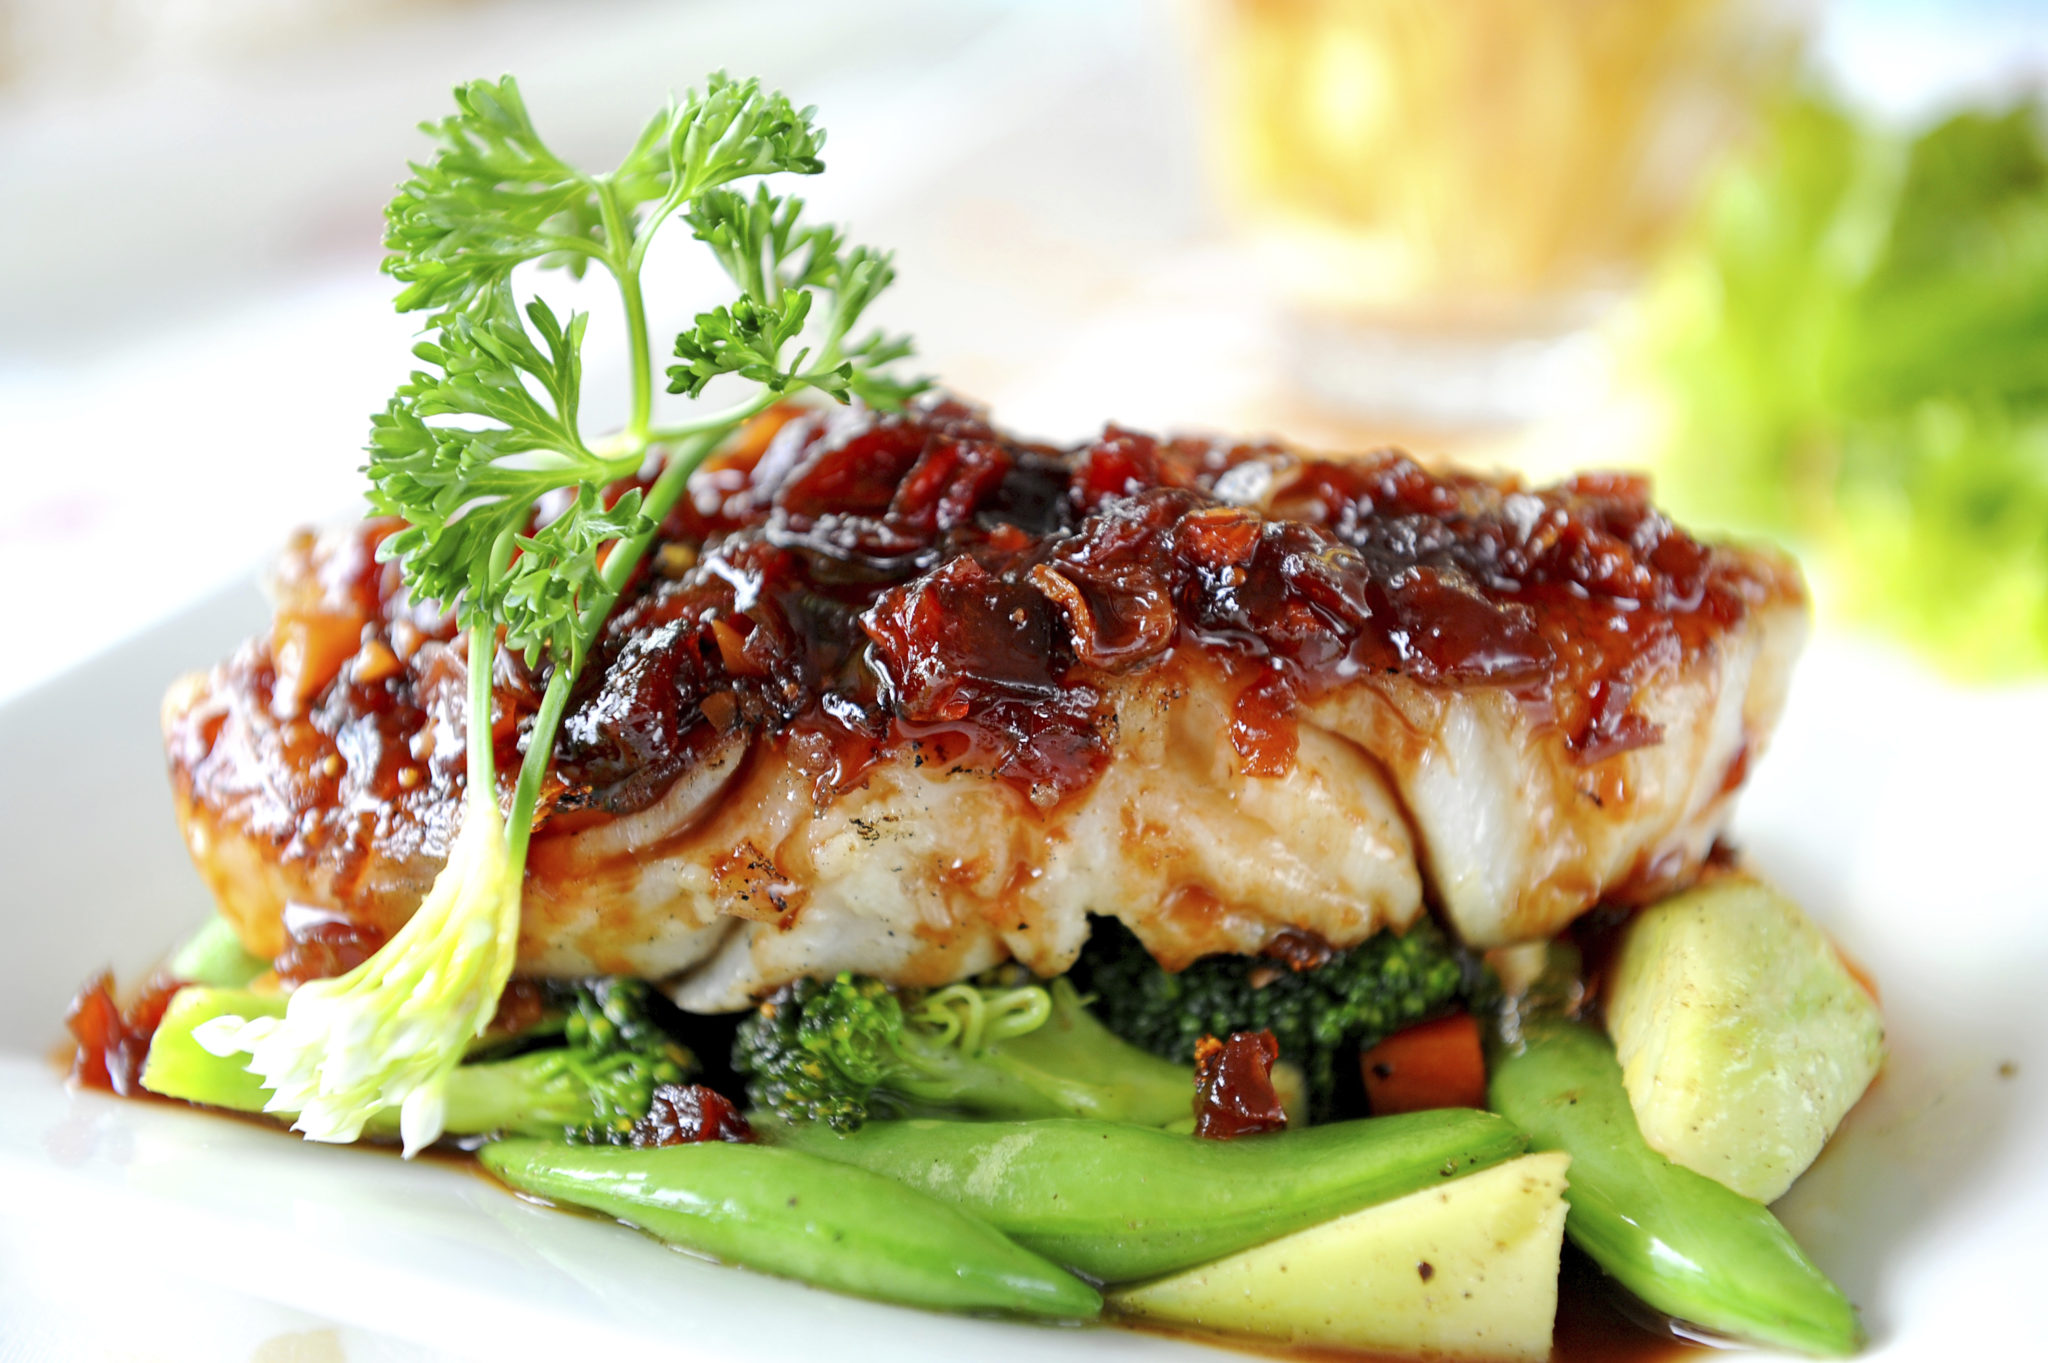 Fish Steak with vegetables